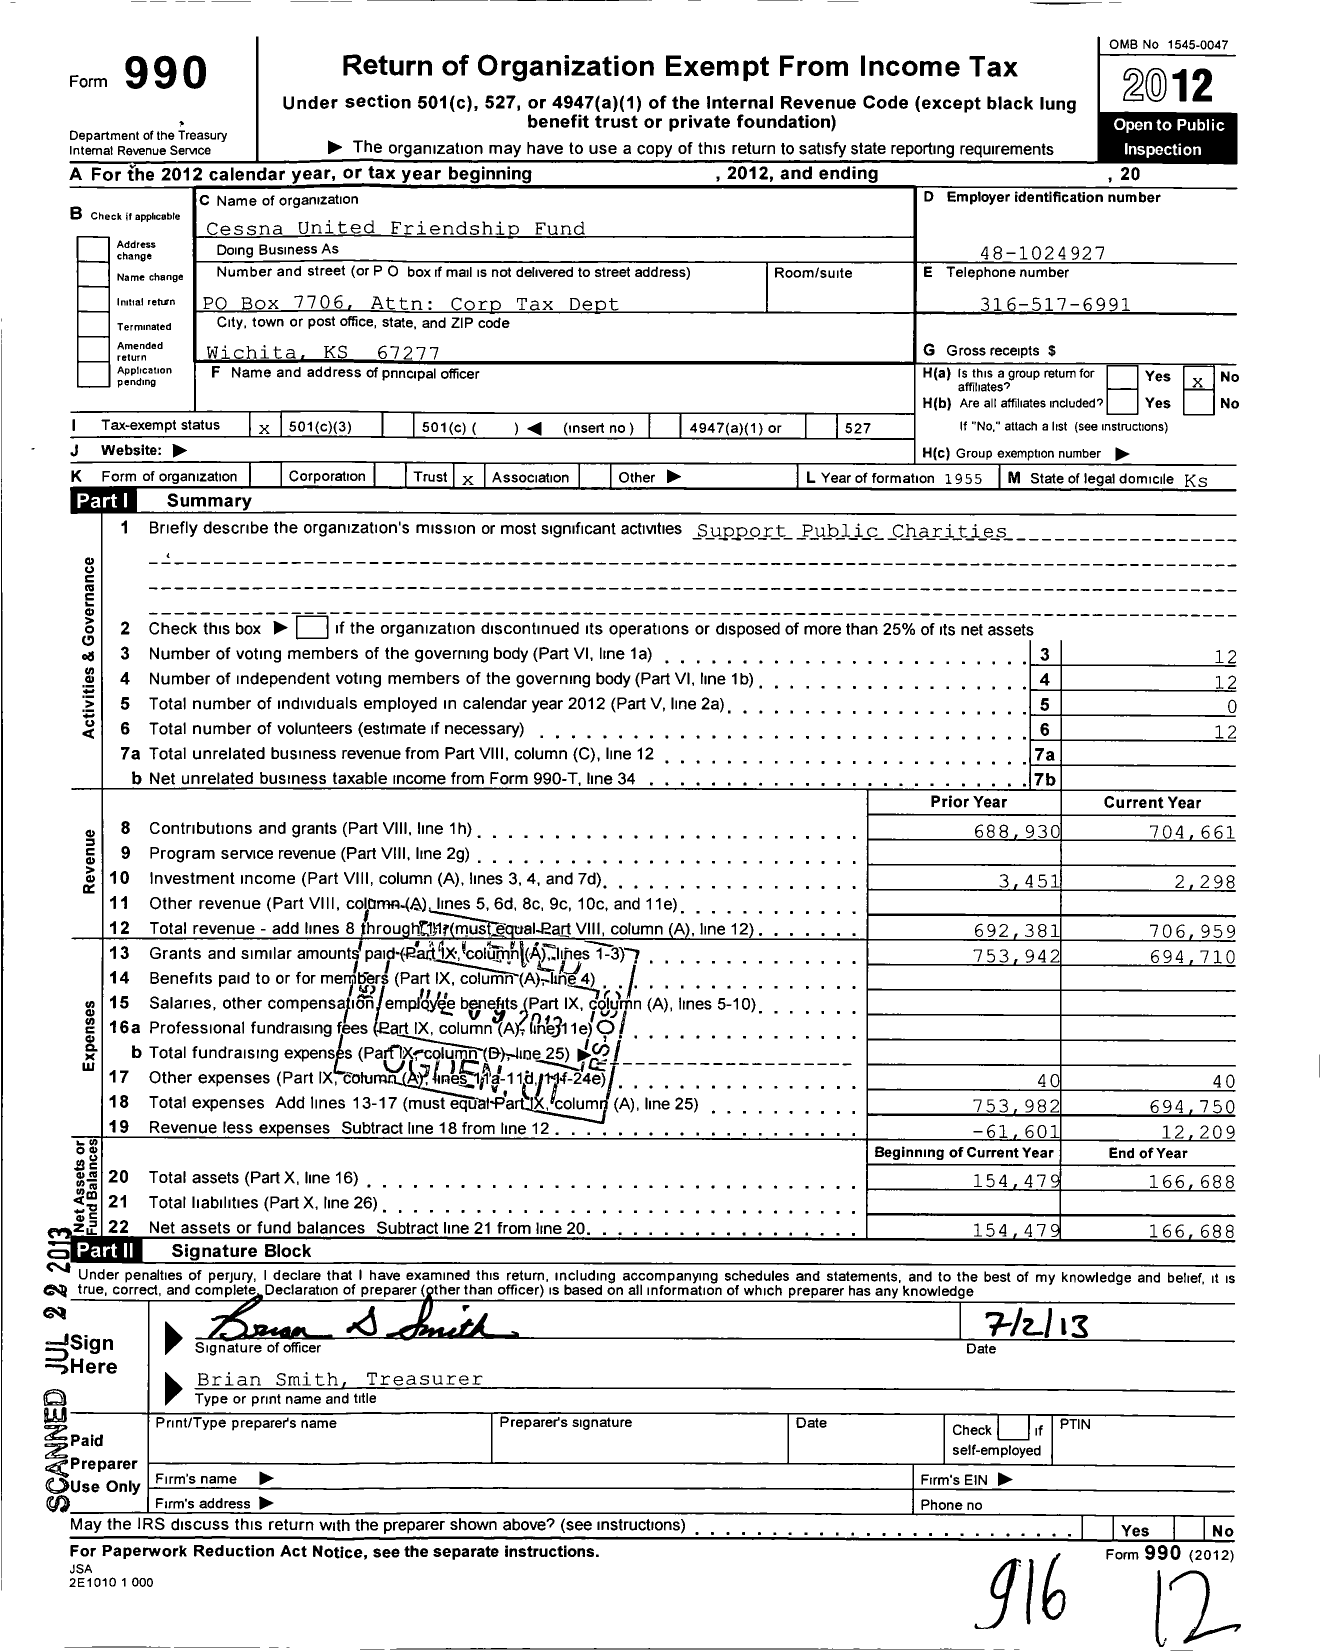 Image of first page of 2012 Form 990 for Cessna United Friendship Fund